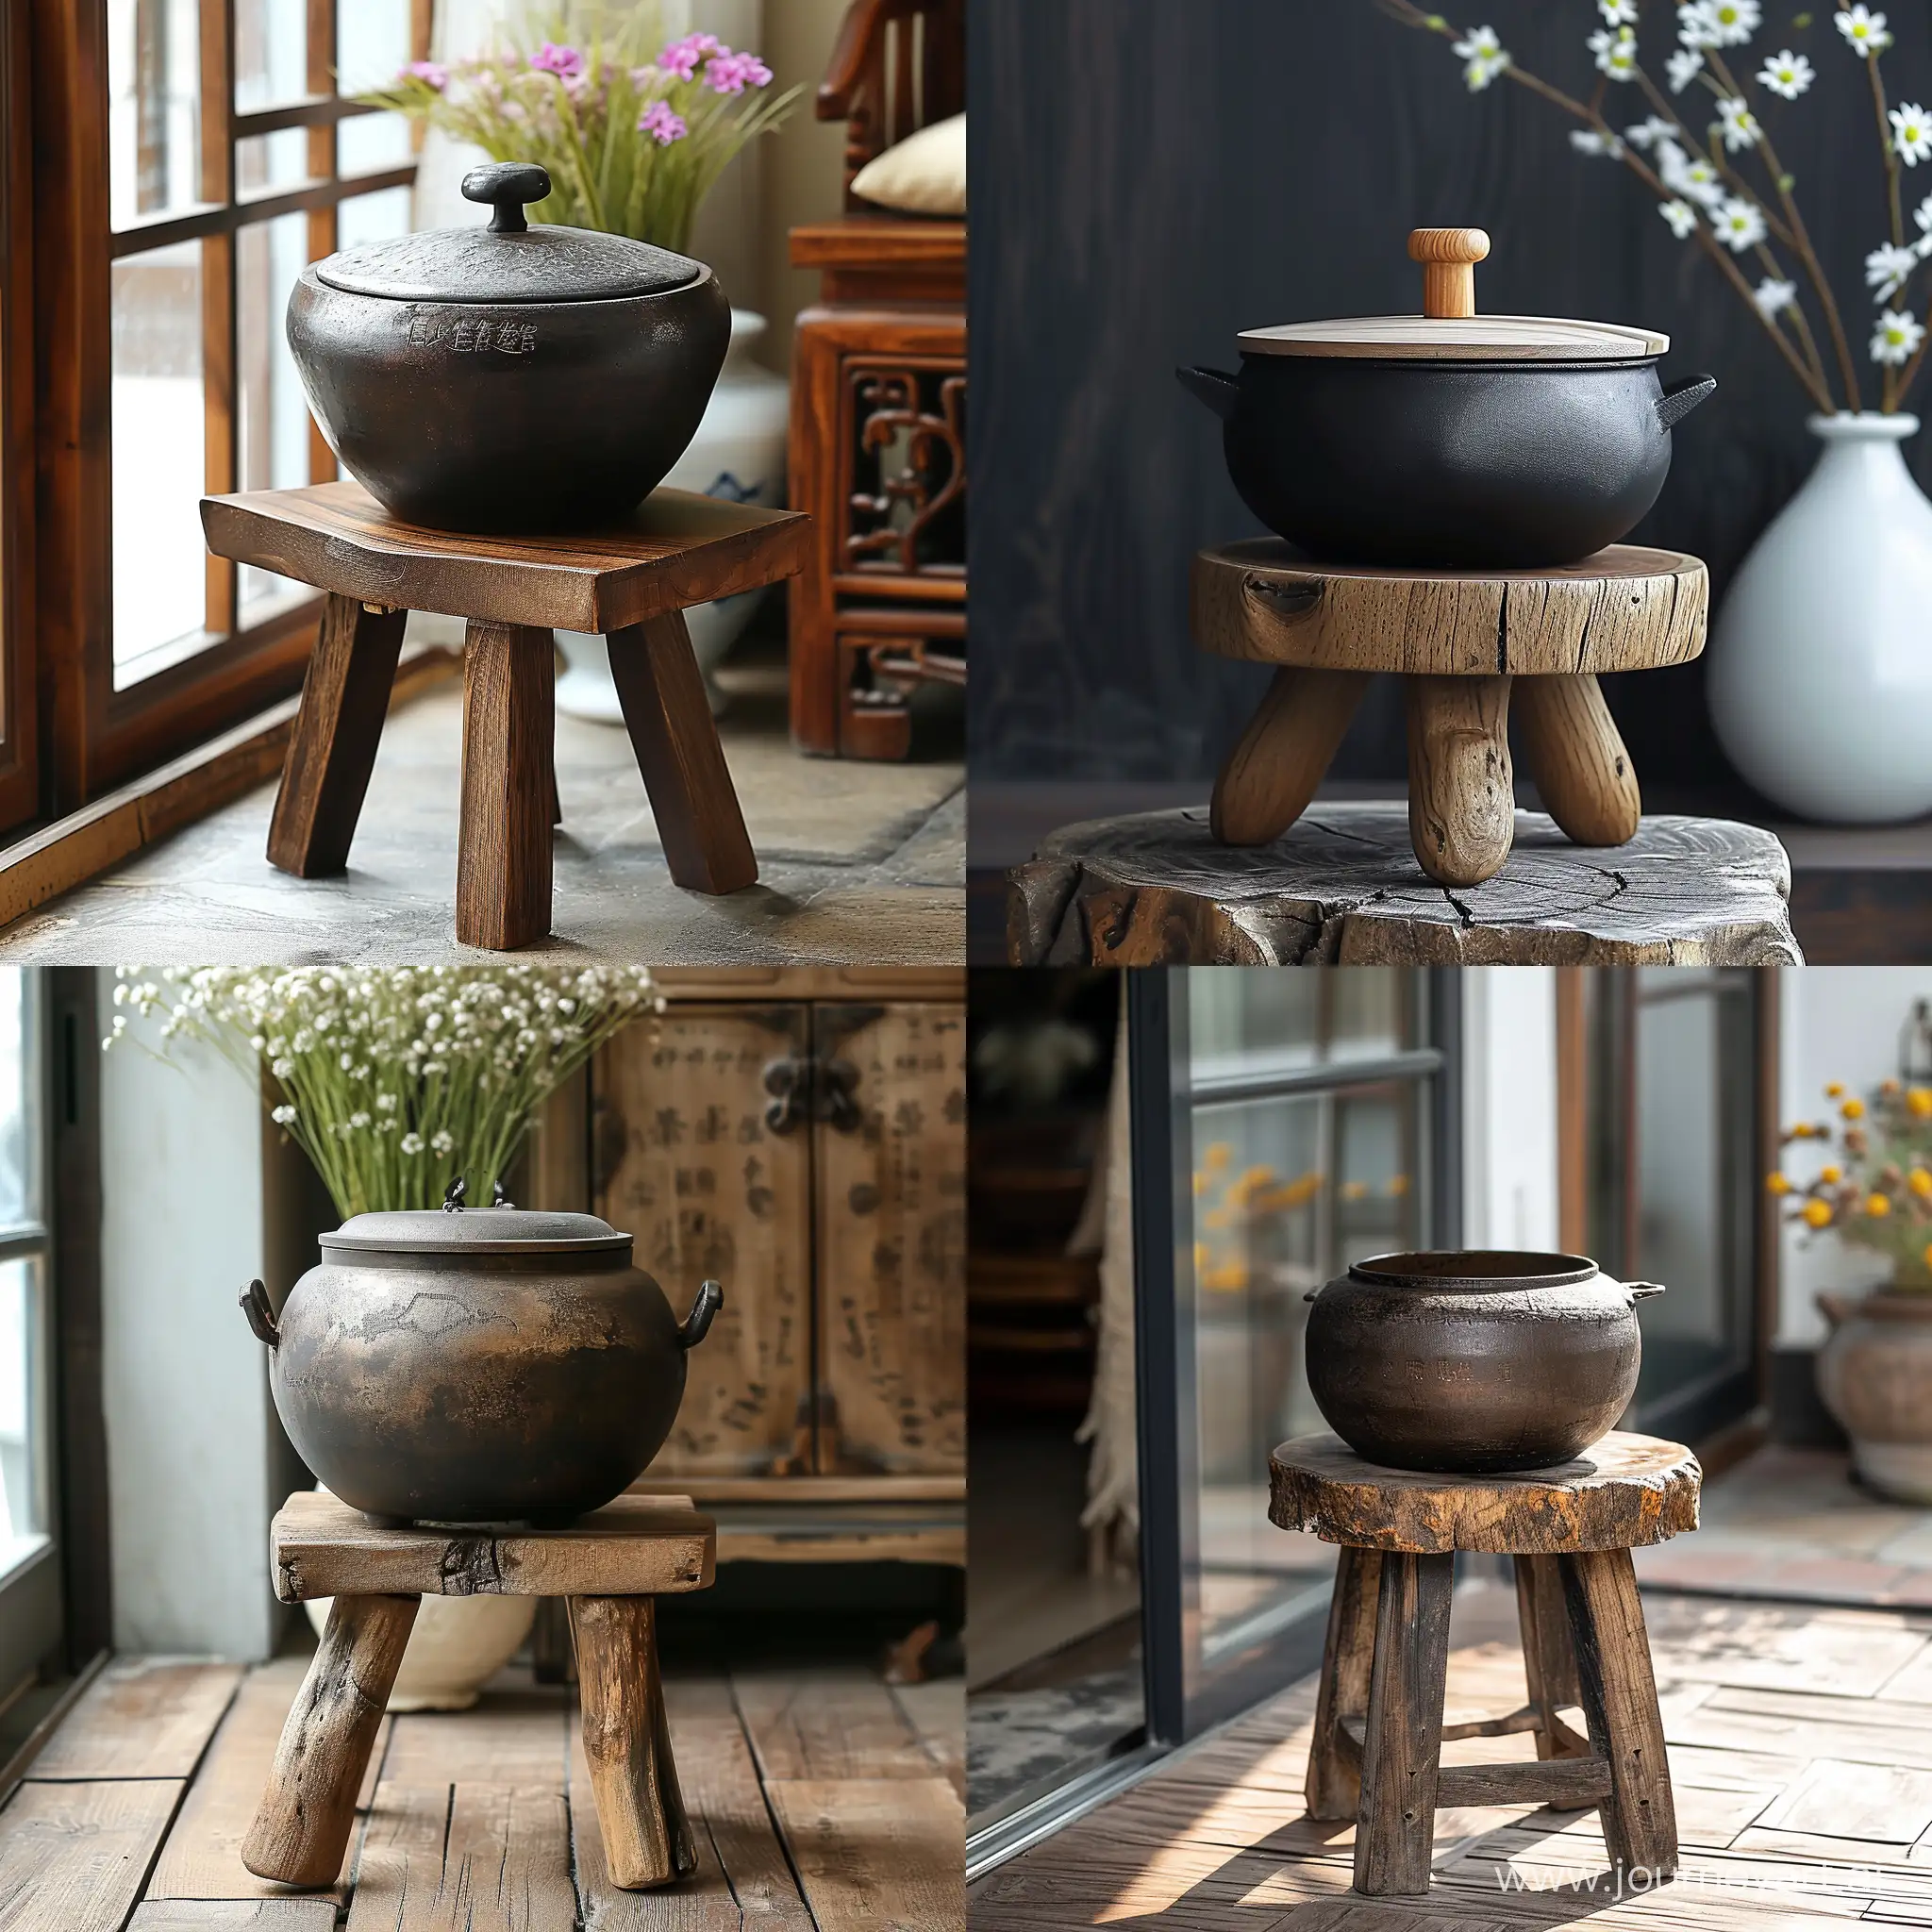 Northeast-Wind-Cooking-Traditional-Stew-in-a-Wooden-Stool-Iron-Pot